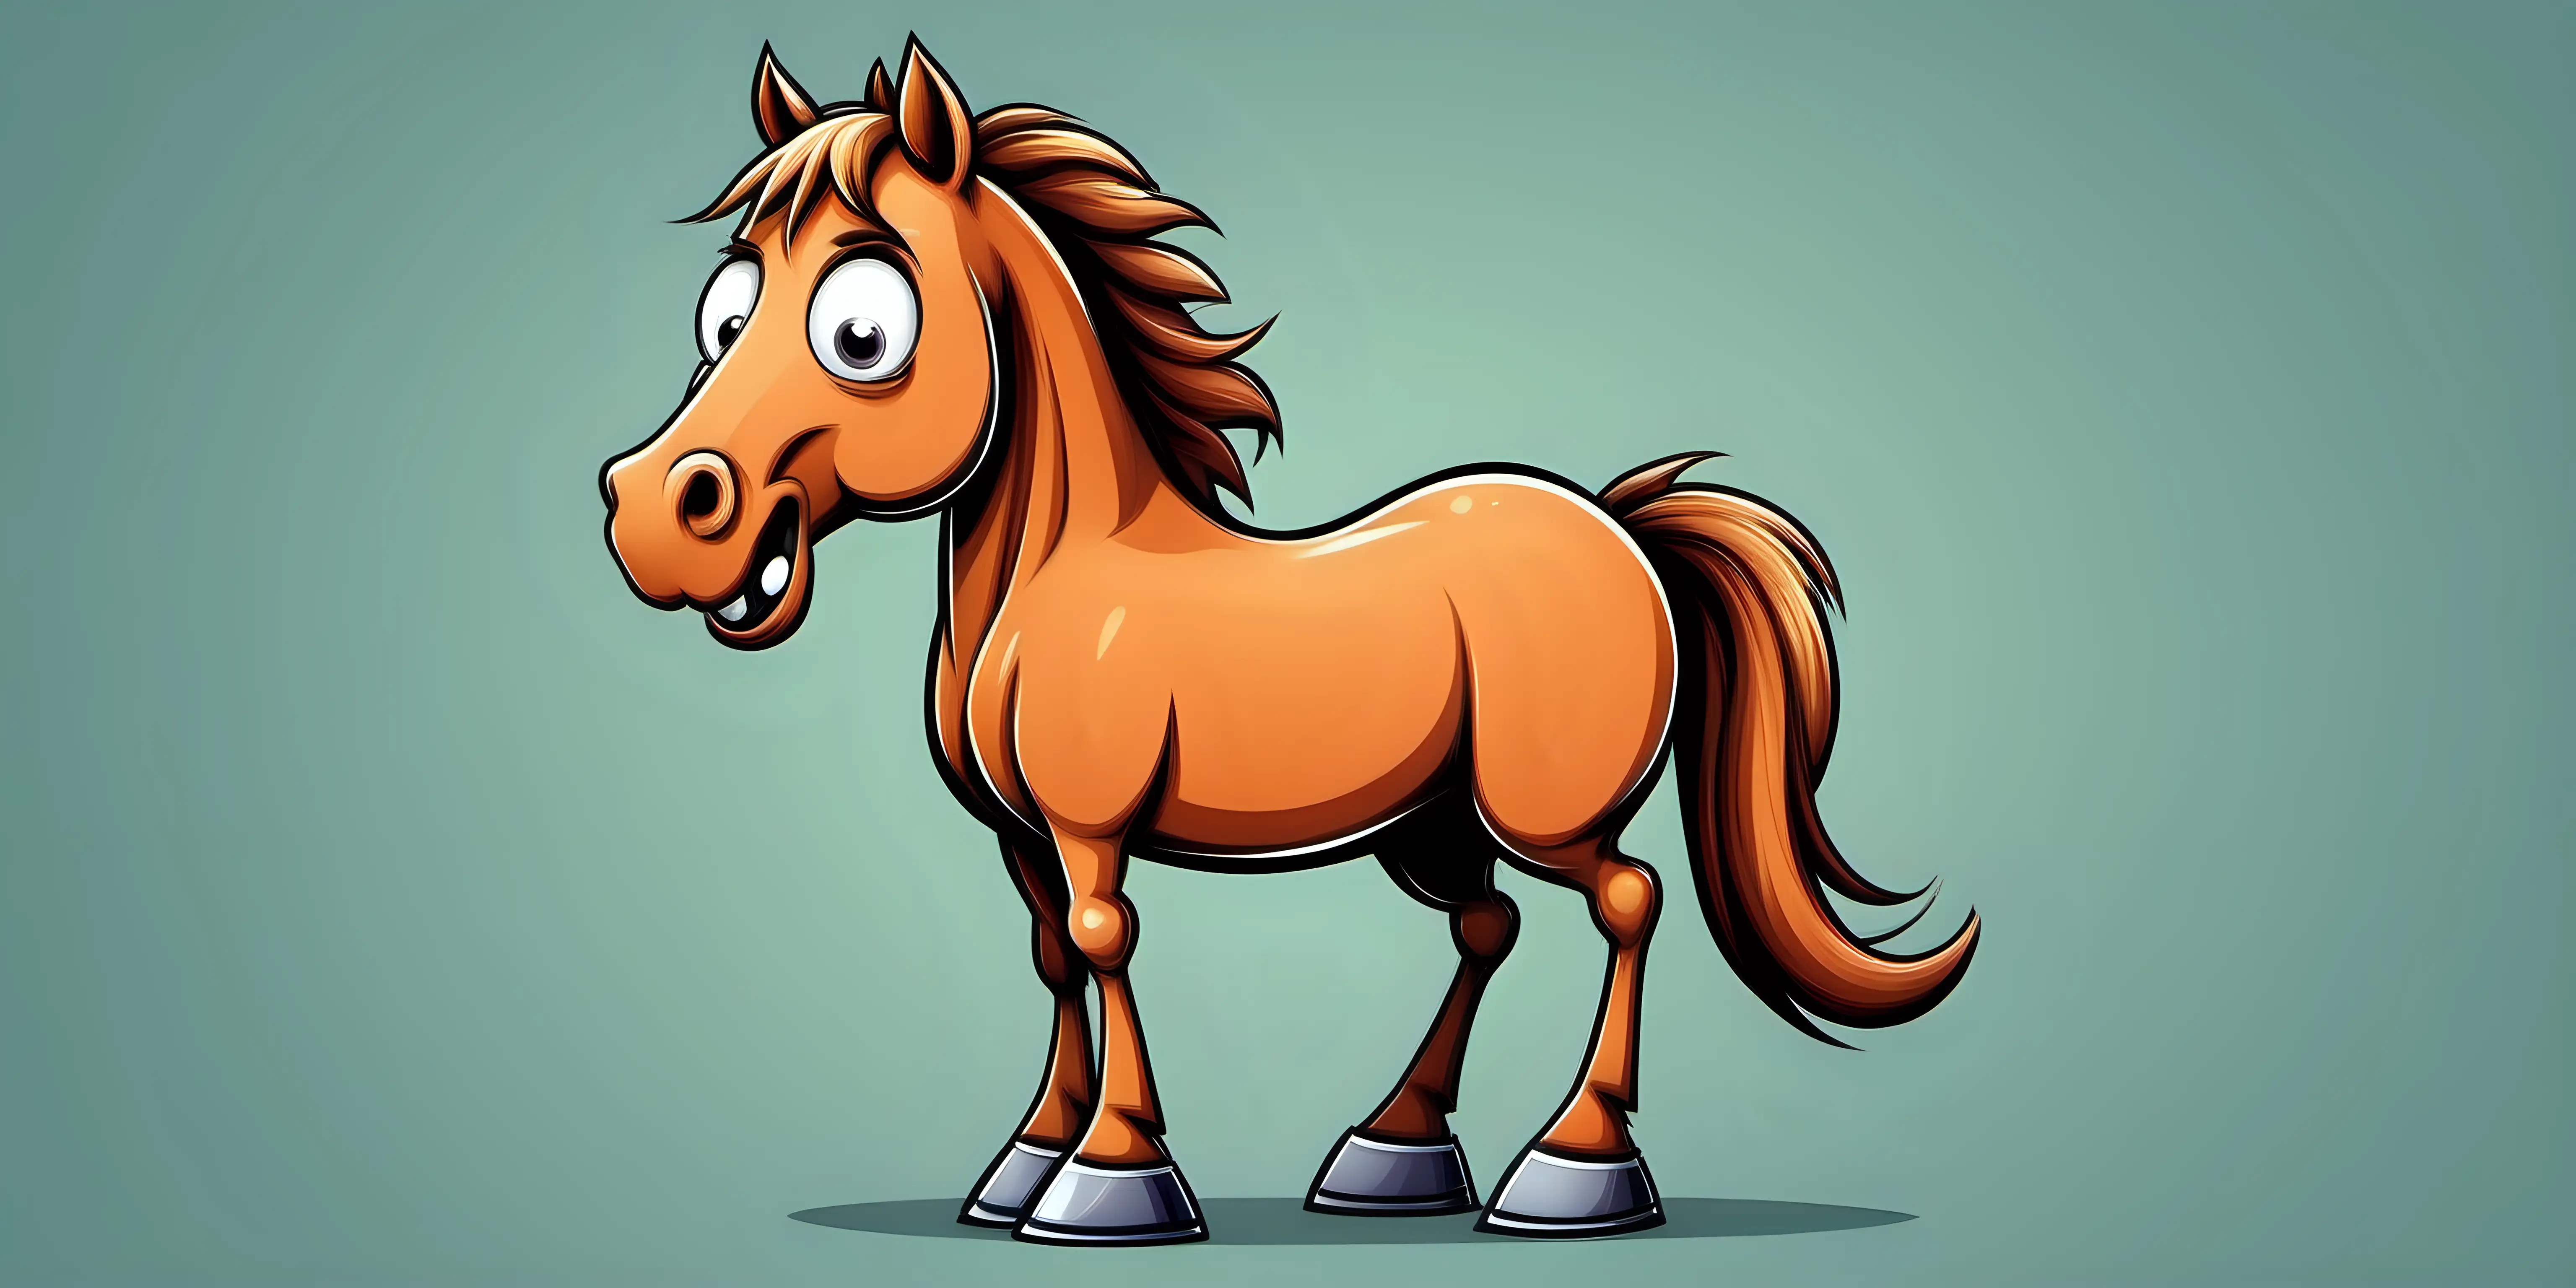 Funny and Cute Cartoon Horse Character